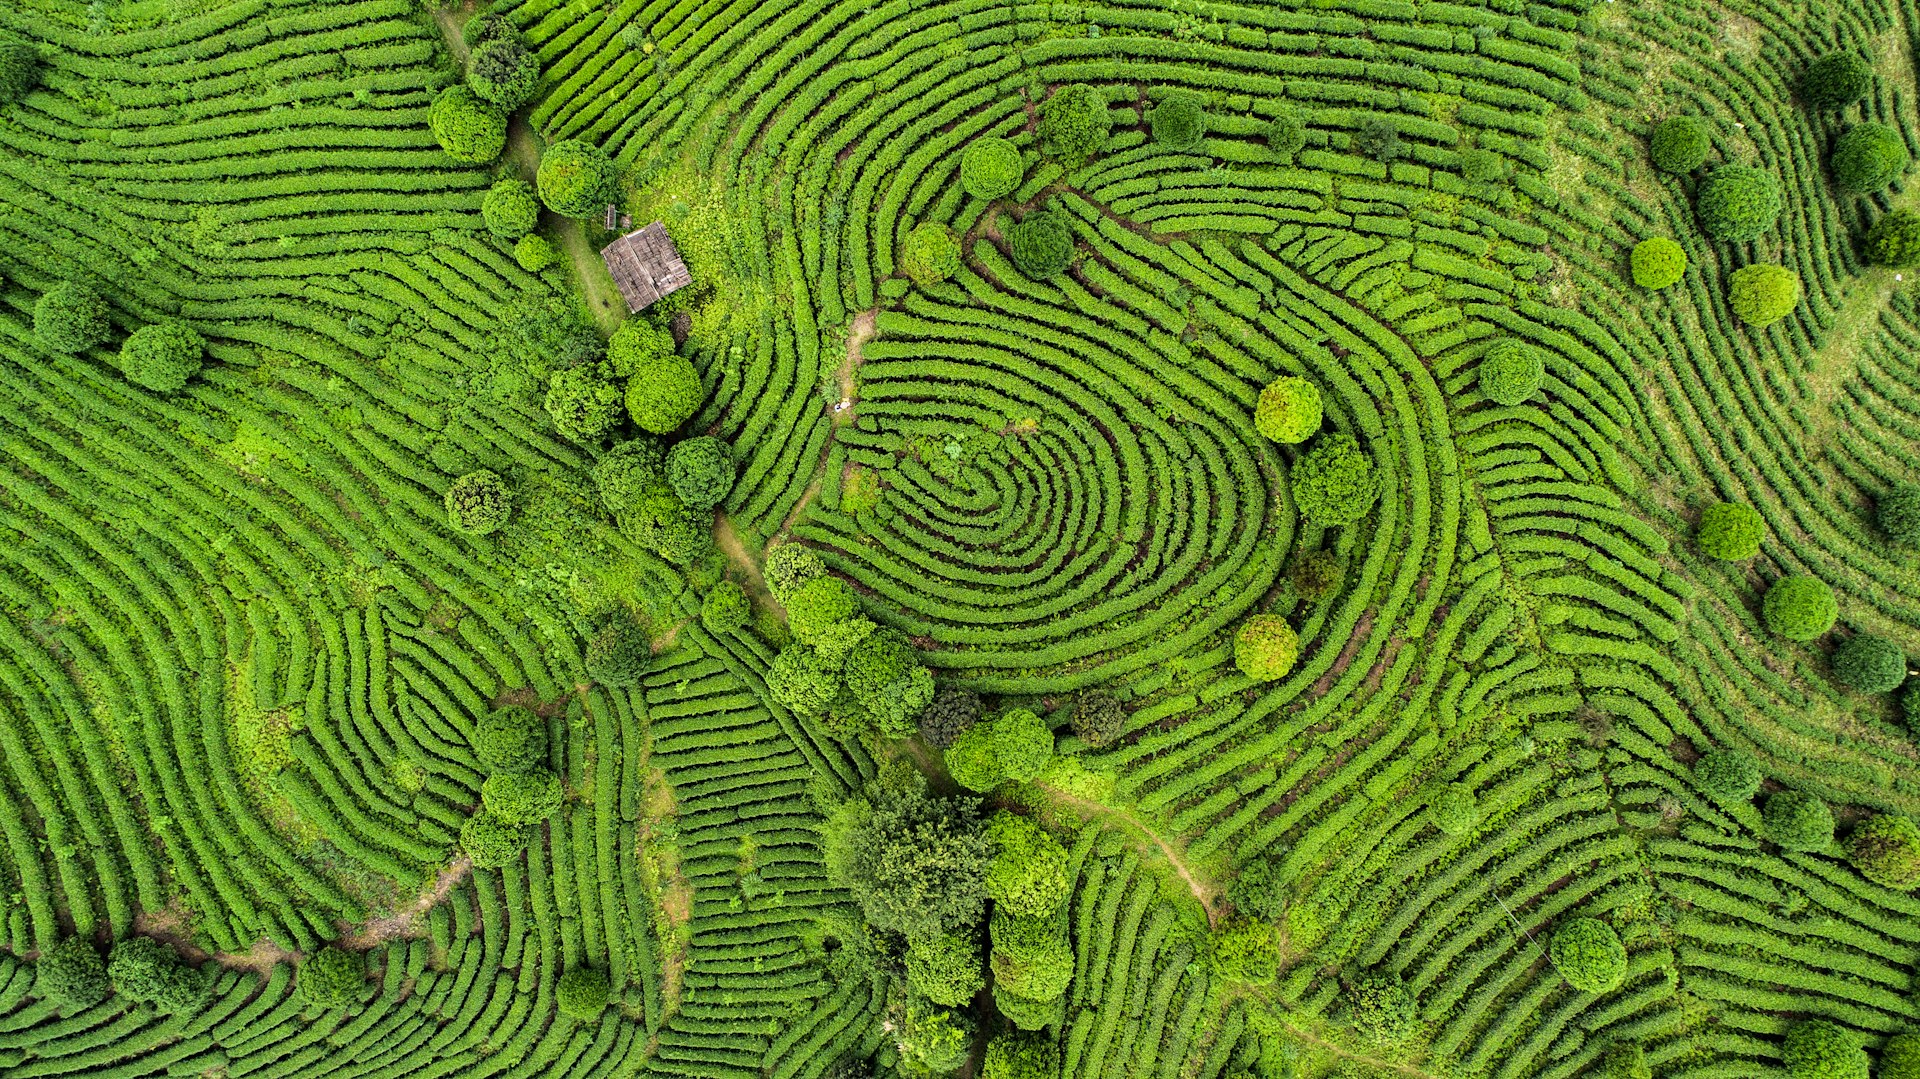 Tea bushes forming giant fingerprints when viewed from above © craftvision / Getty Images